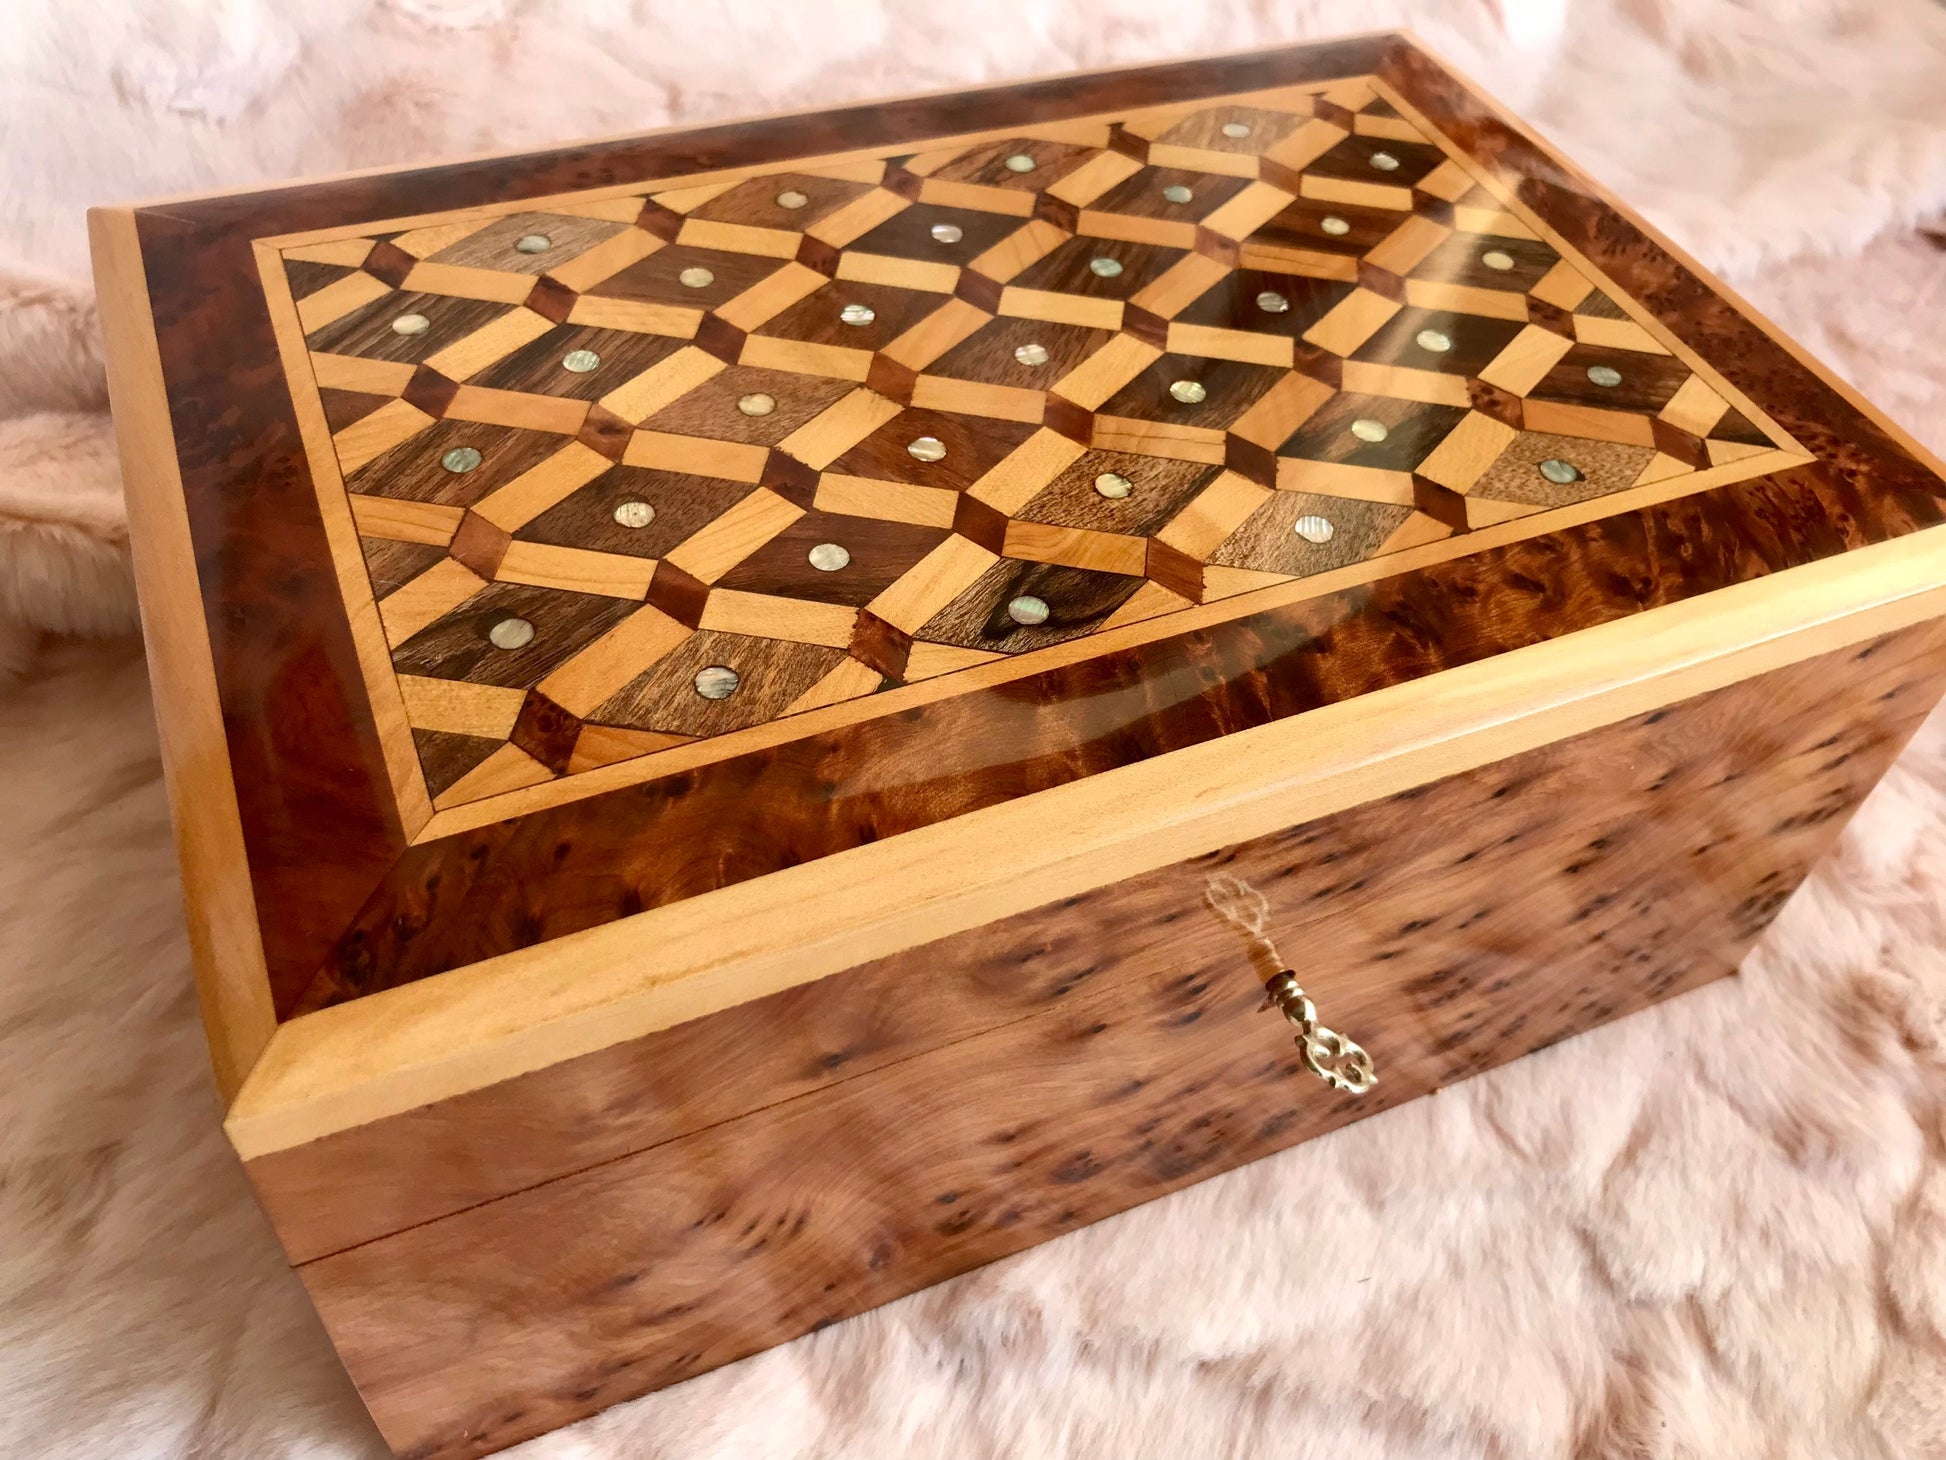 10"x7" Large jewellery Thuya wood Box with key,inlaid with mother of pearl,cedar wood,Gift idea, engraved Custom Moroccan wood Box with lock